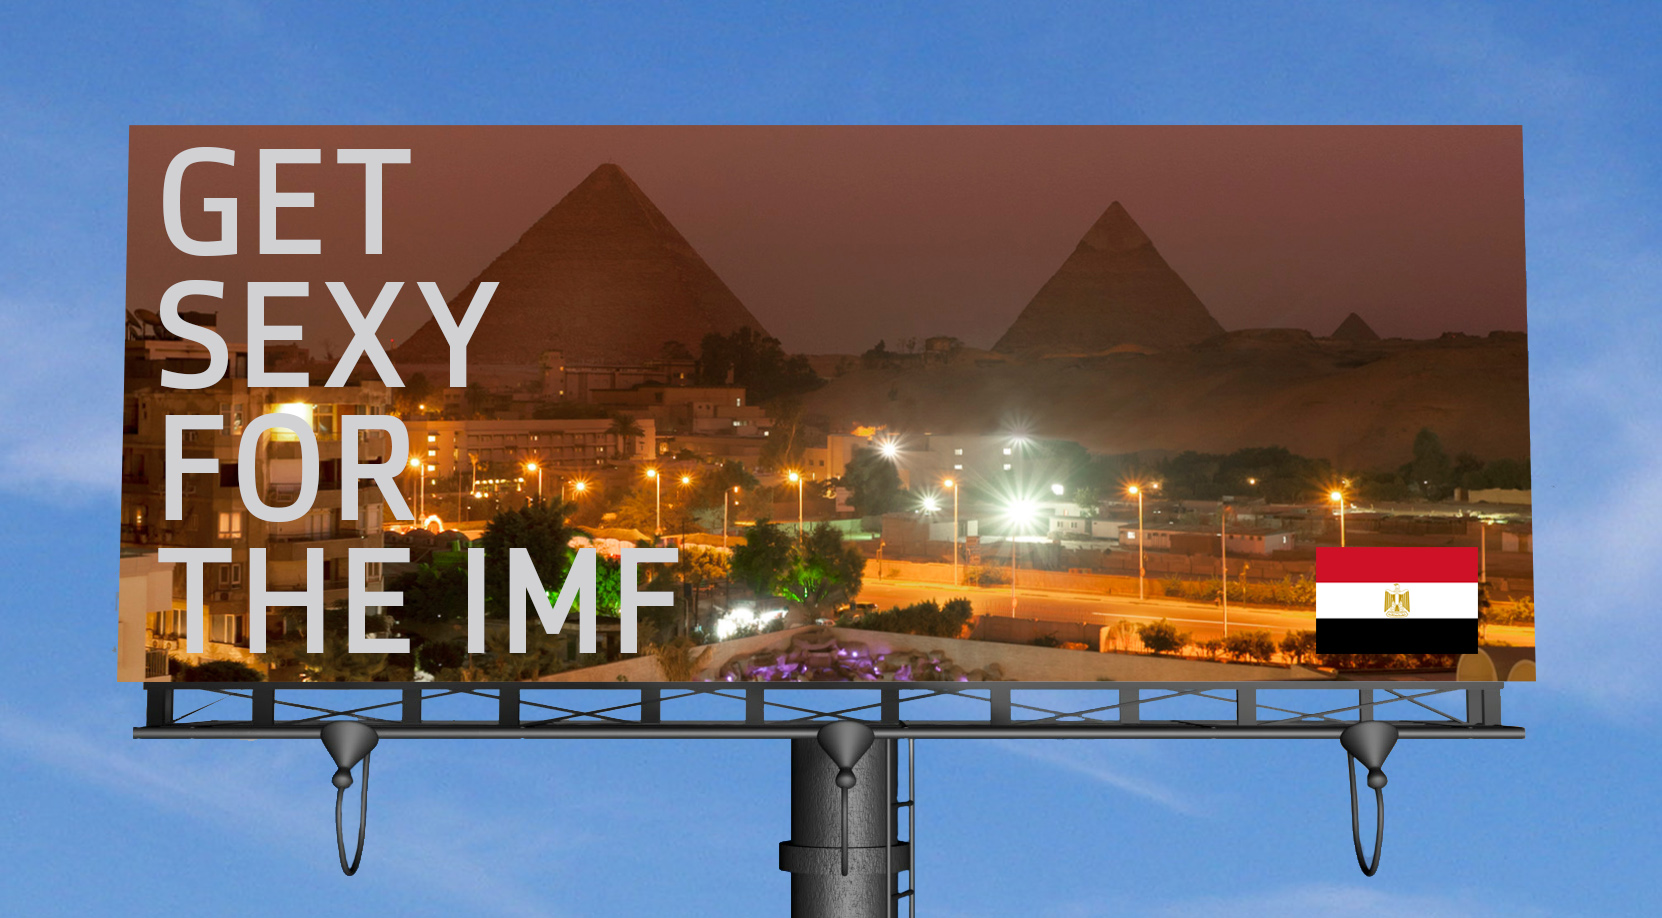 5 Billboards Showing How Egypt Will Get Sexy for the IMF